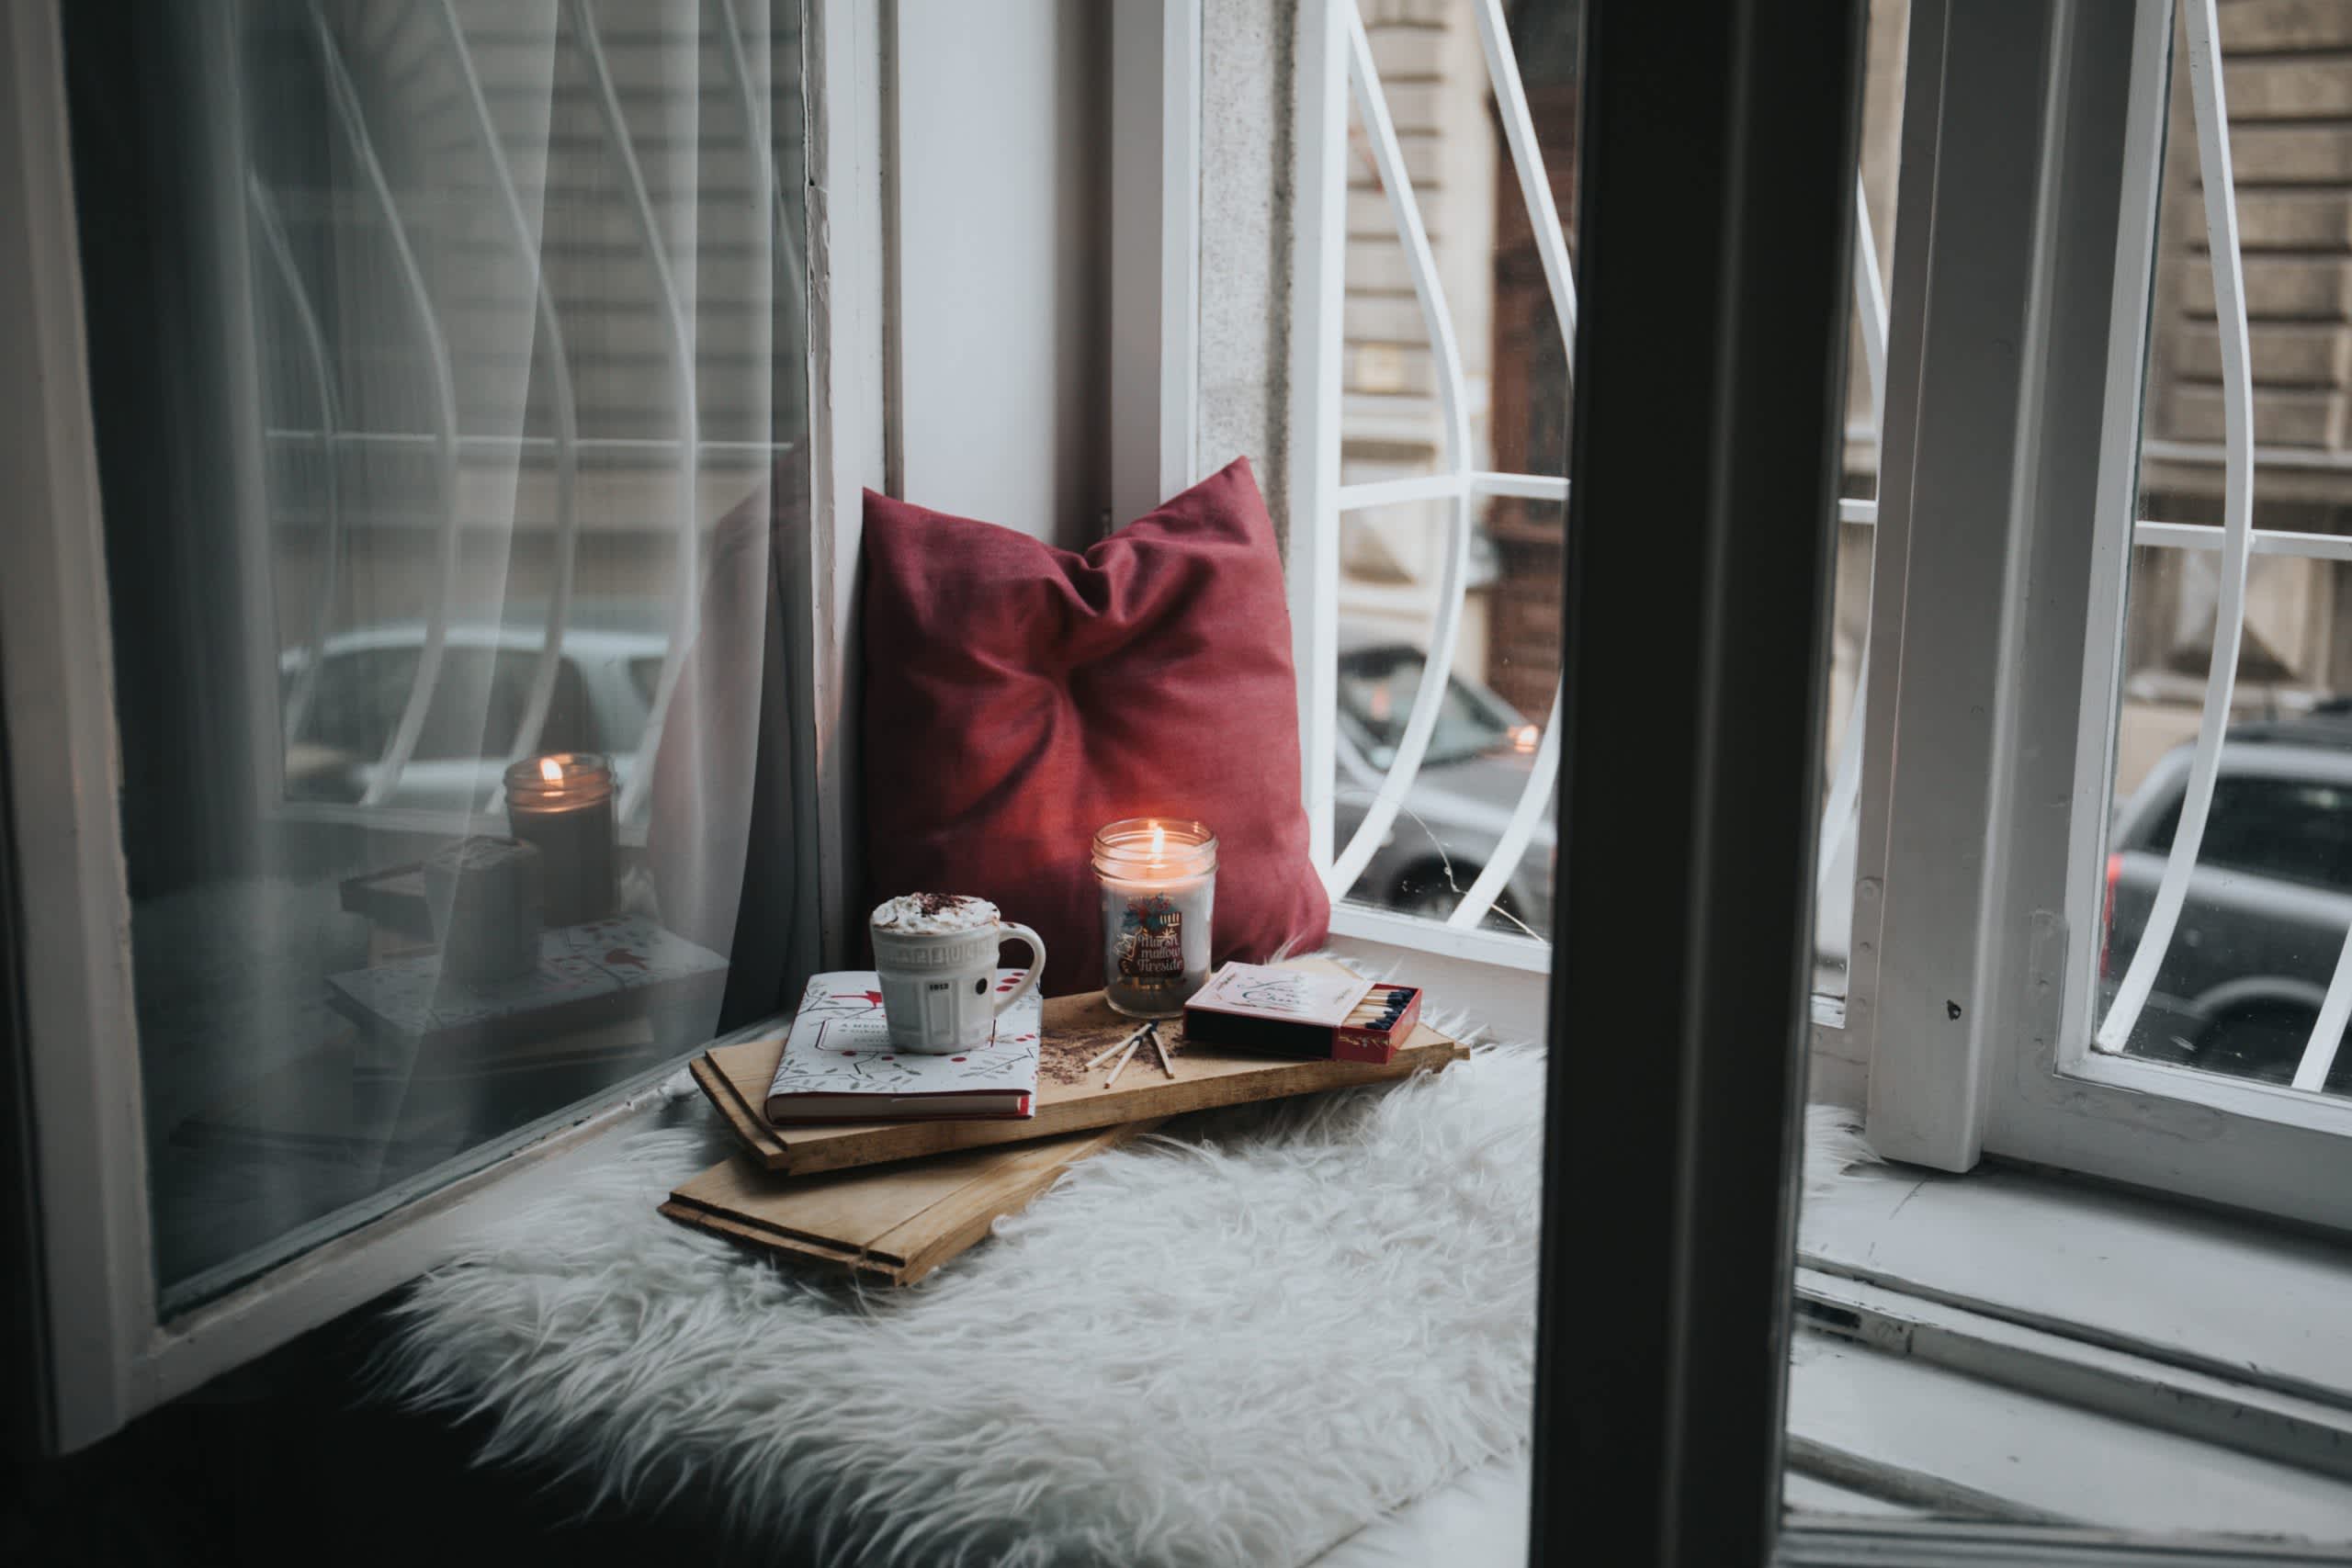 A spread of self-care items including cocoa, candles and a pillow by a window during winter